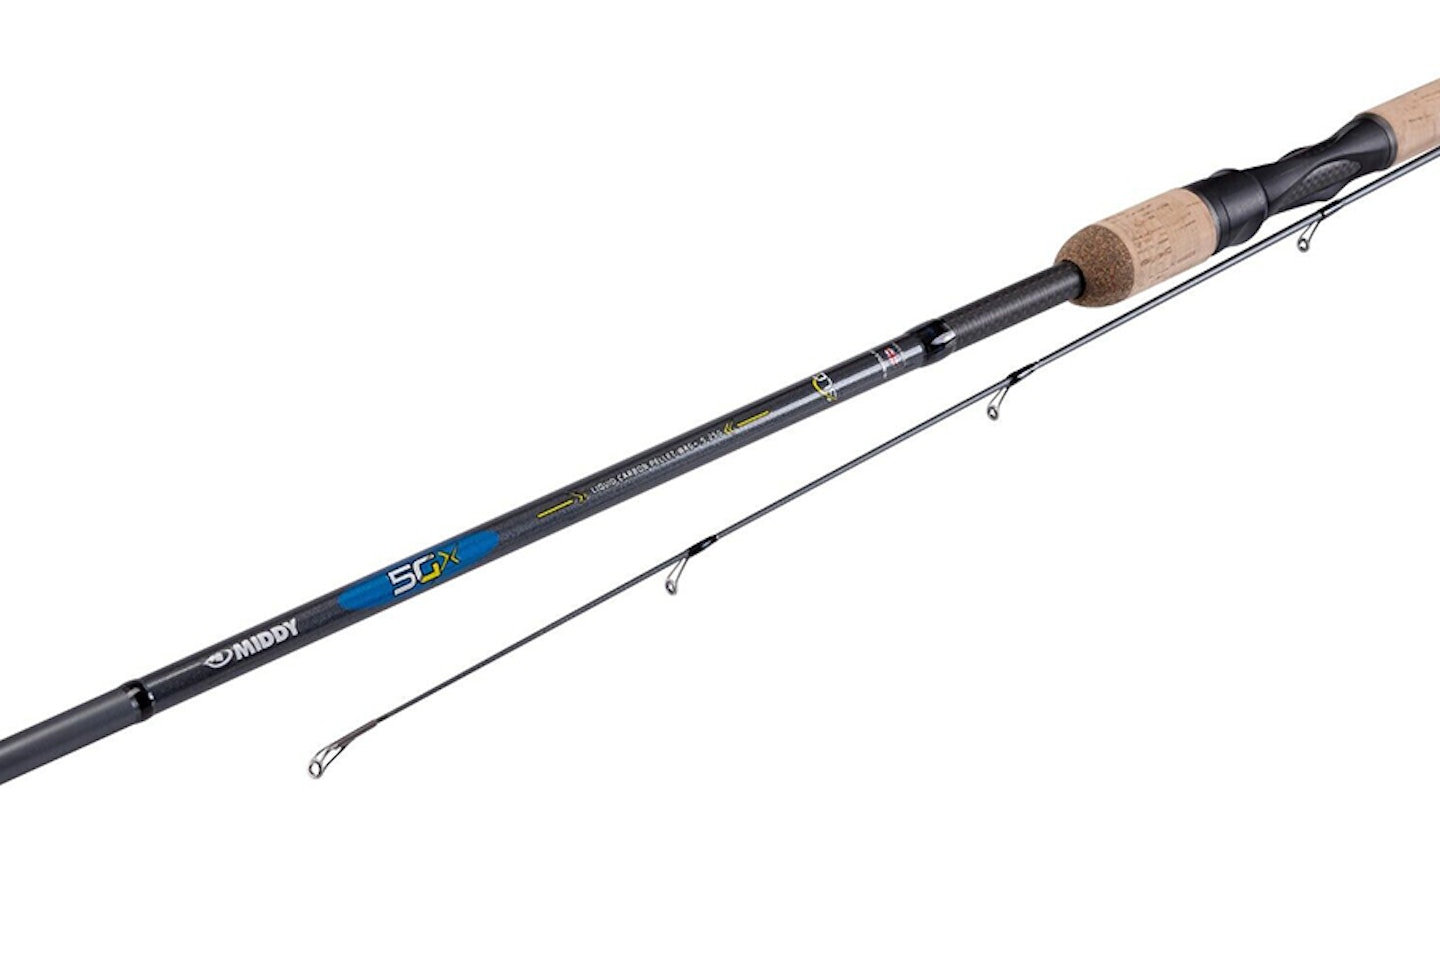 Middy 5G Pellet Waggler Rod